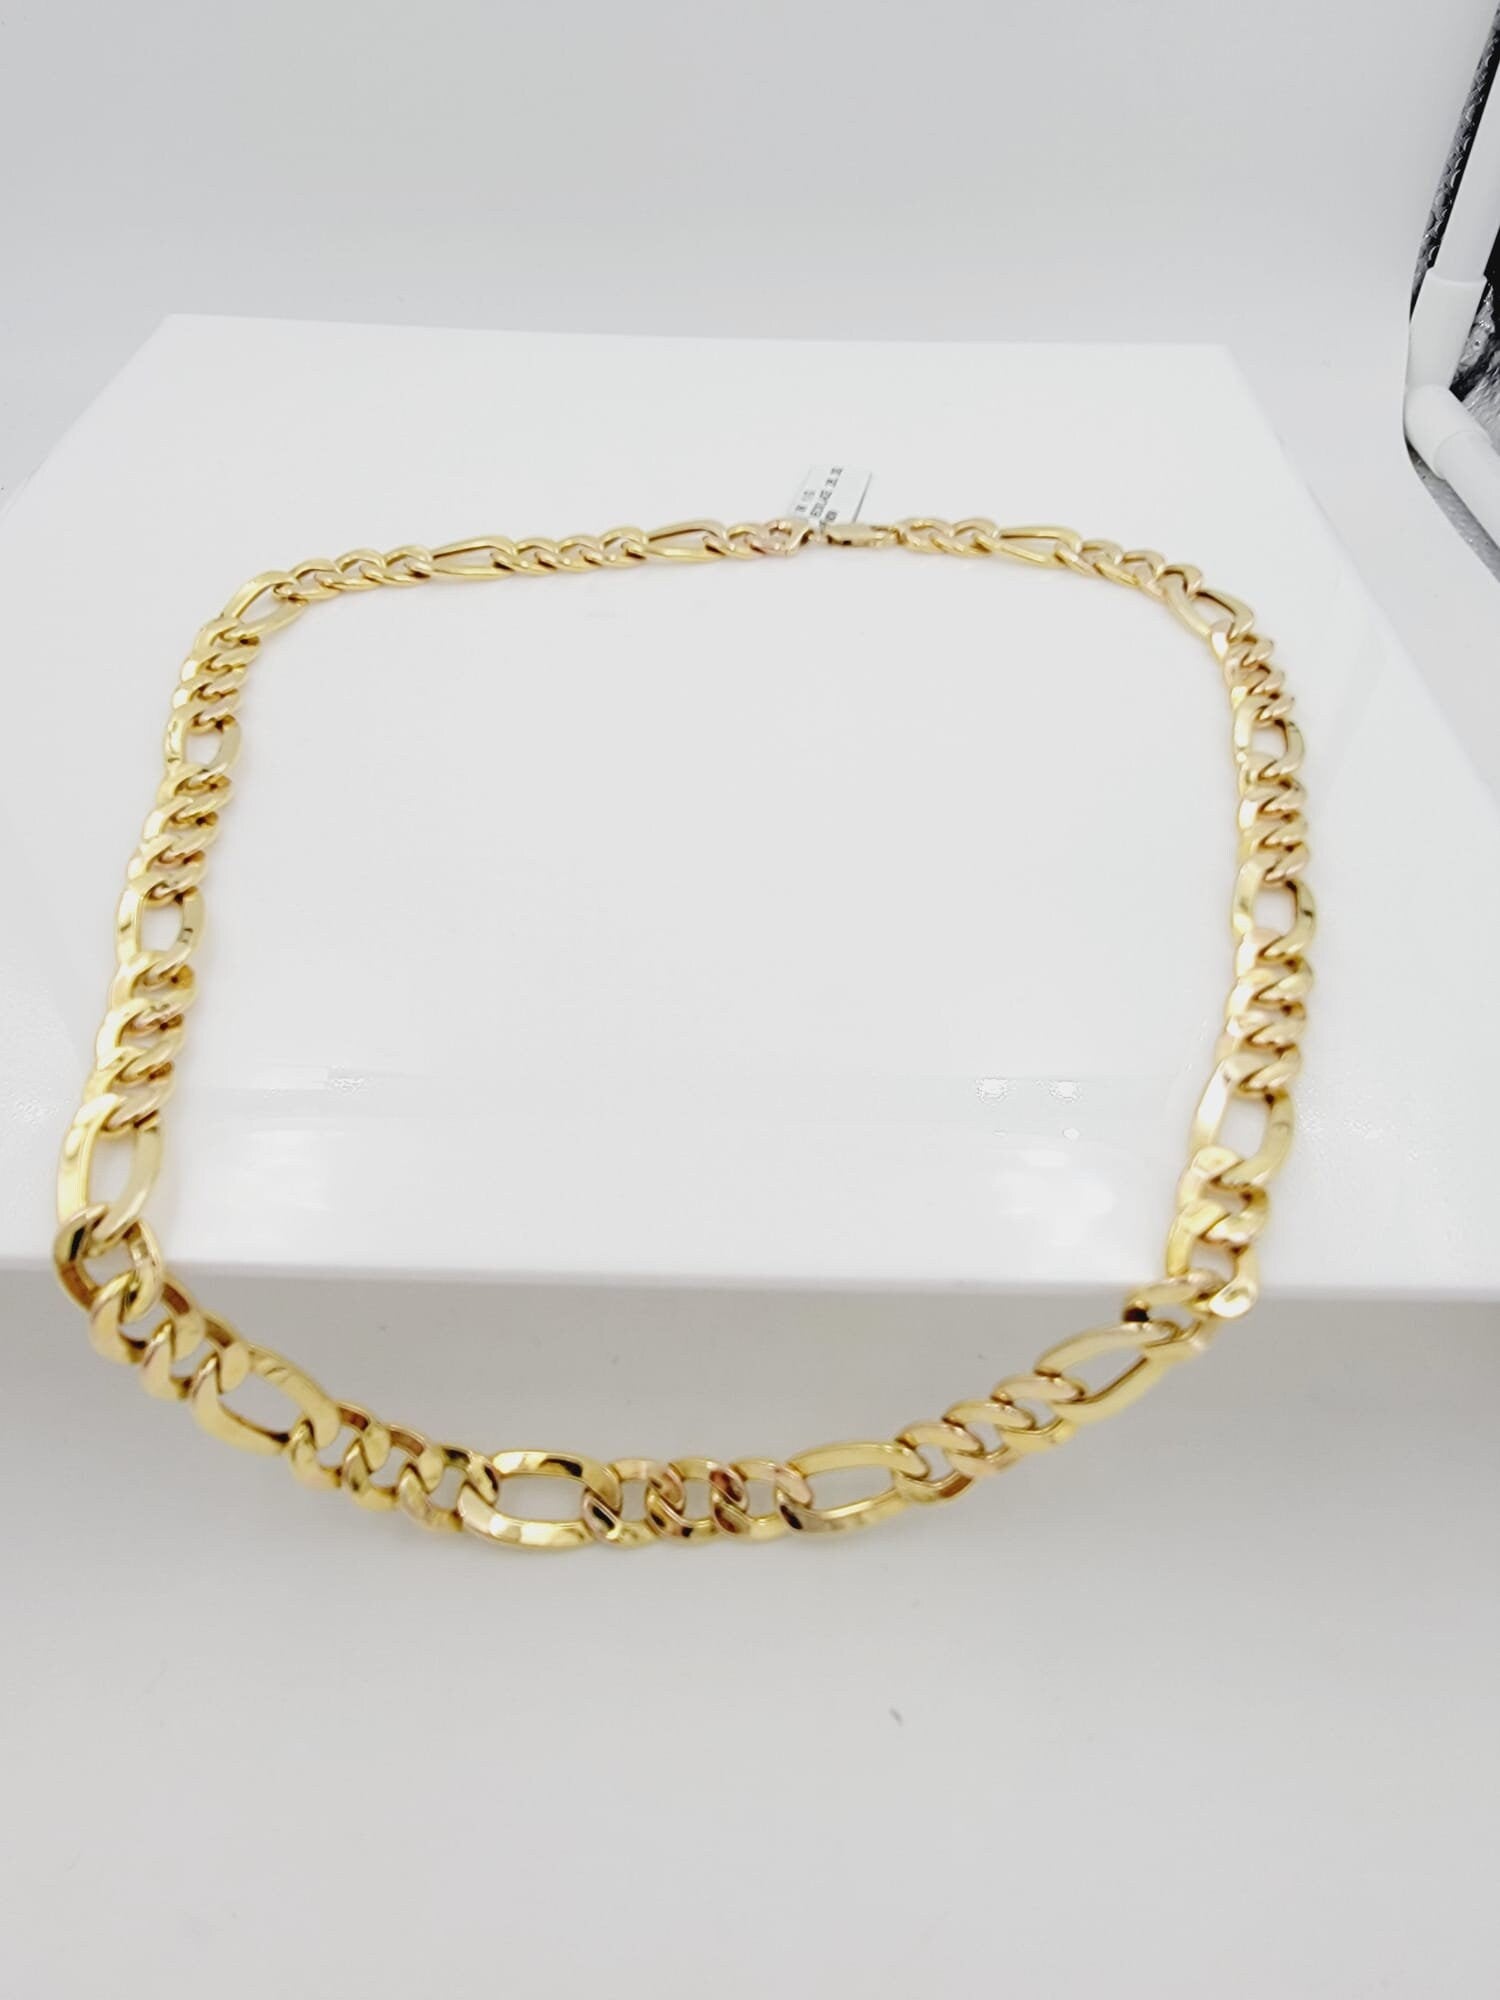 10k Yellow Gold Figaro Link Chain - 22 Inches, 10.4 mm, 26.3 grams